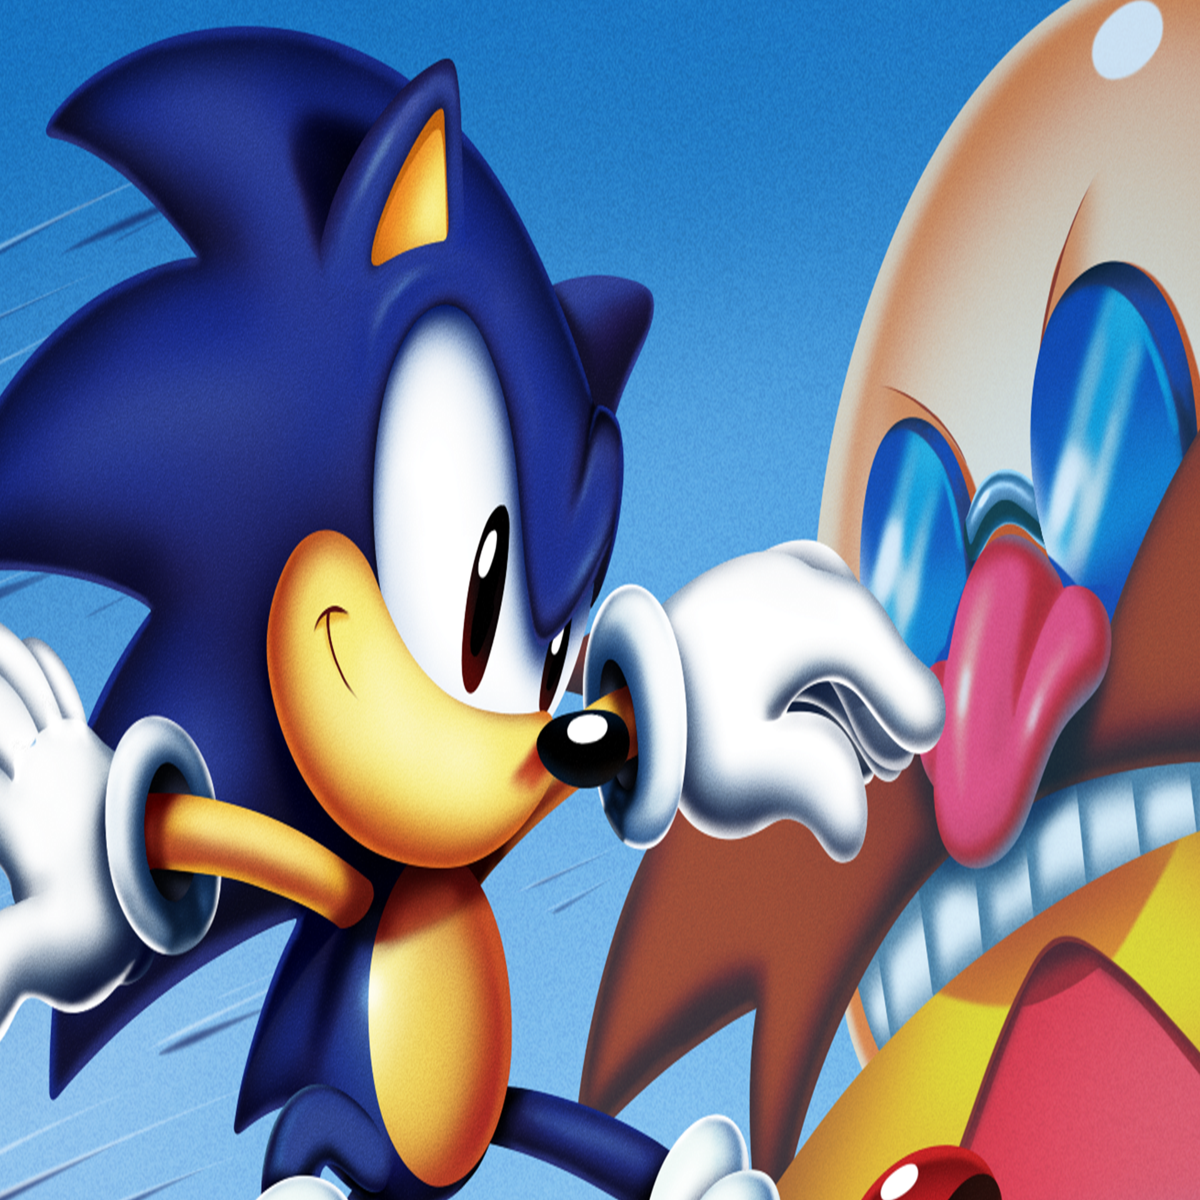 Play Sonic the Hedgehog 2 for free without downloads